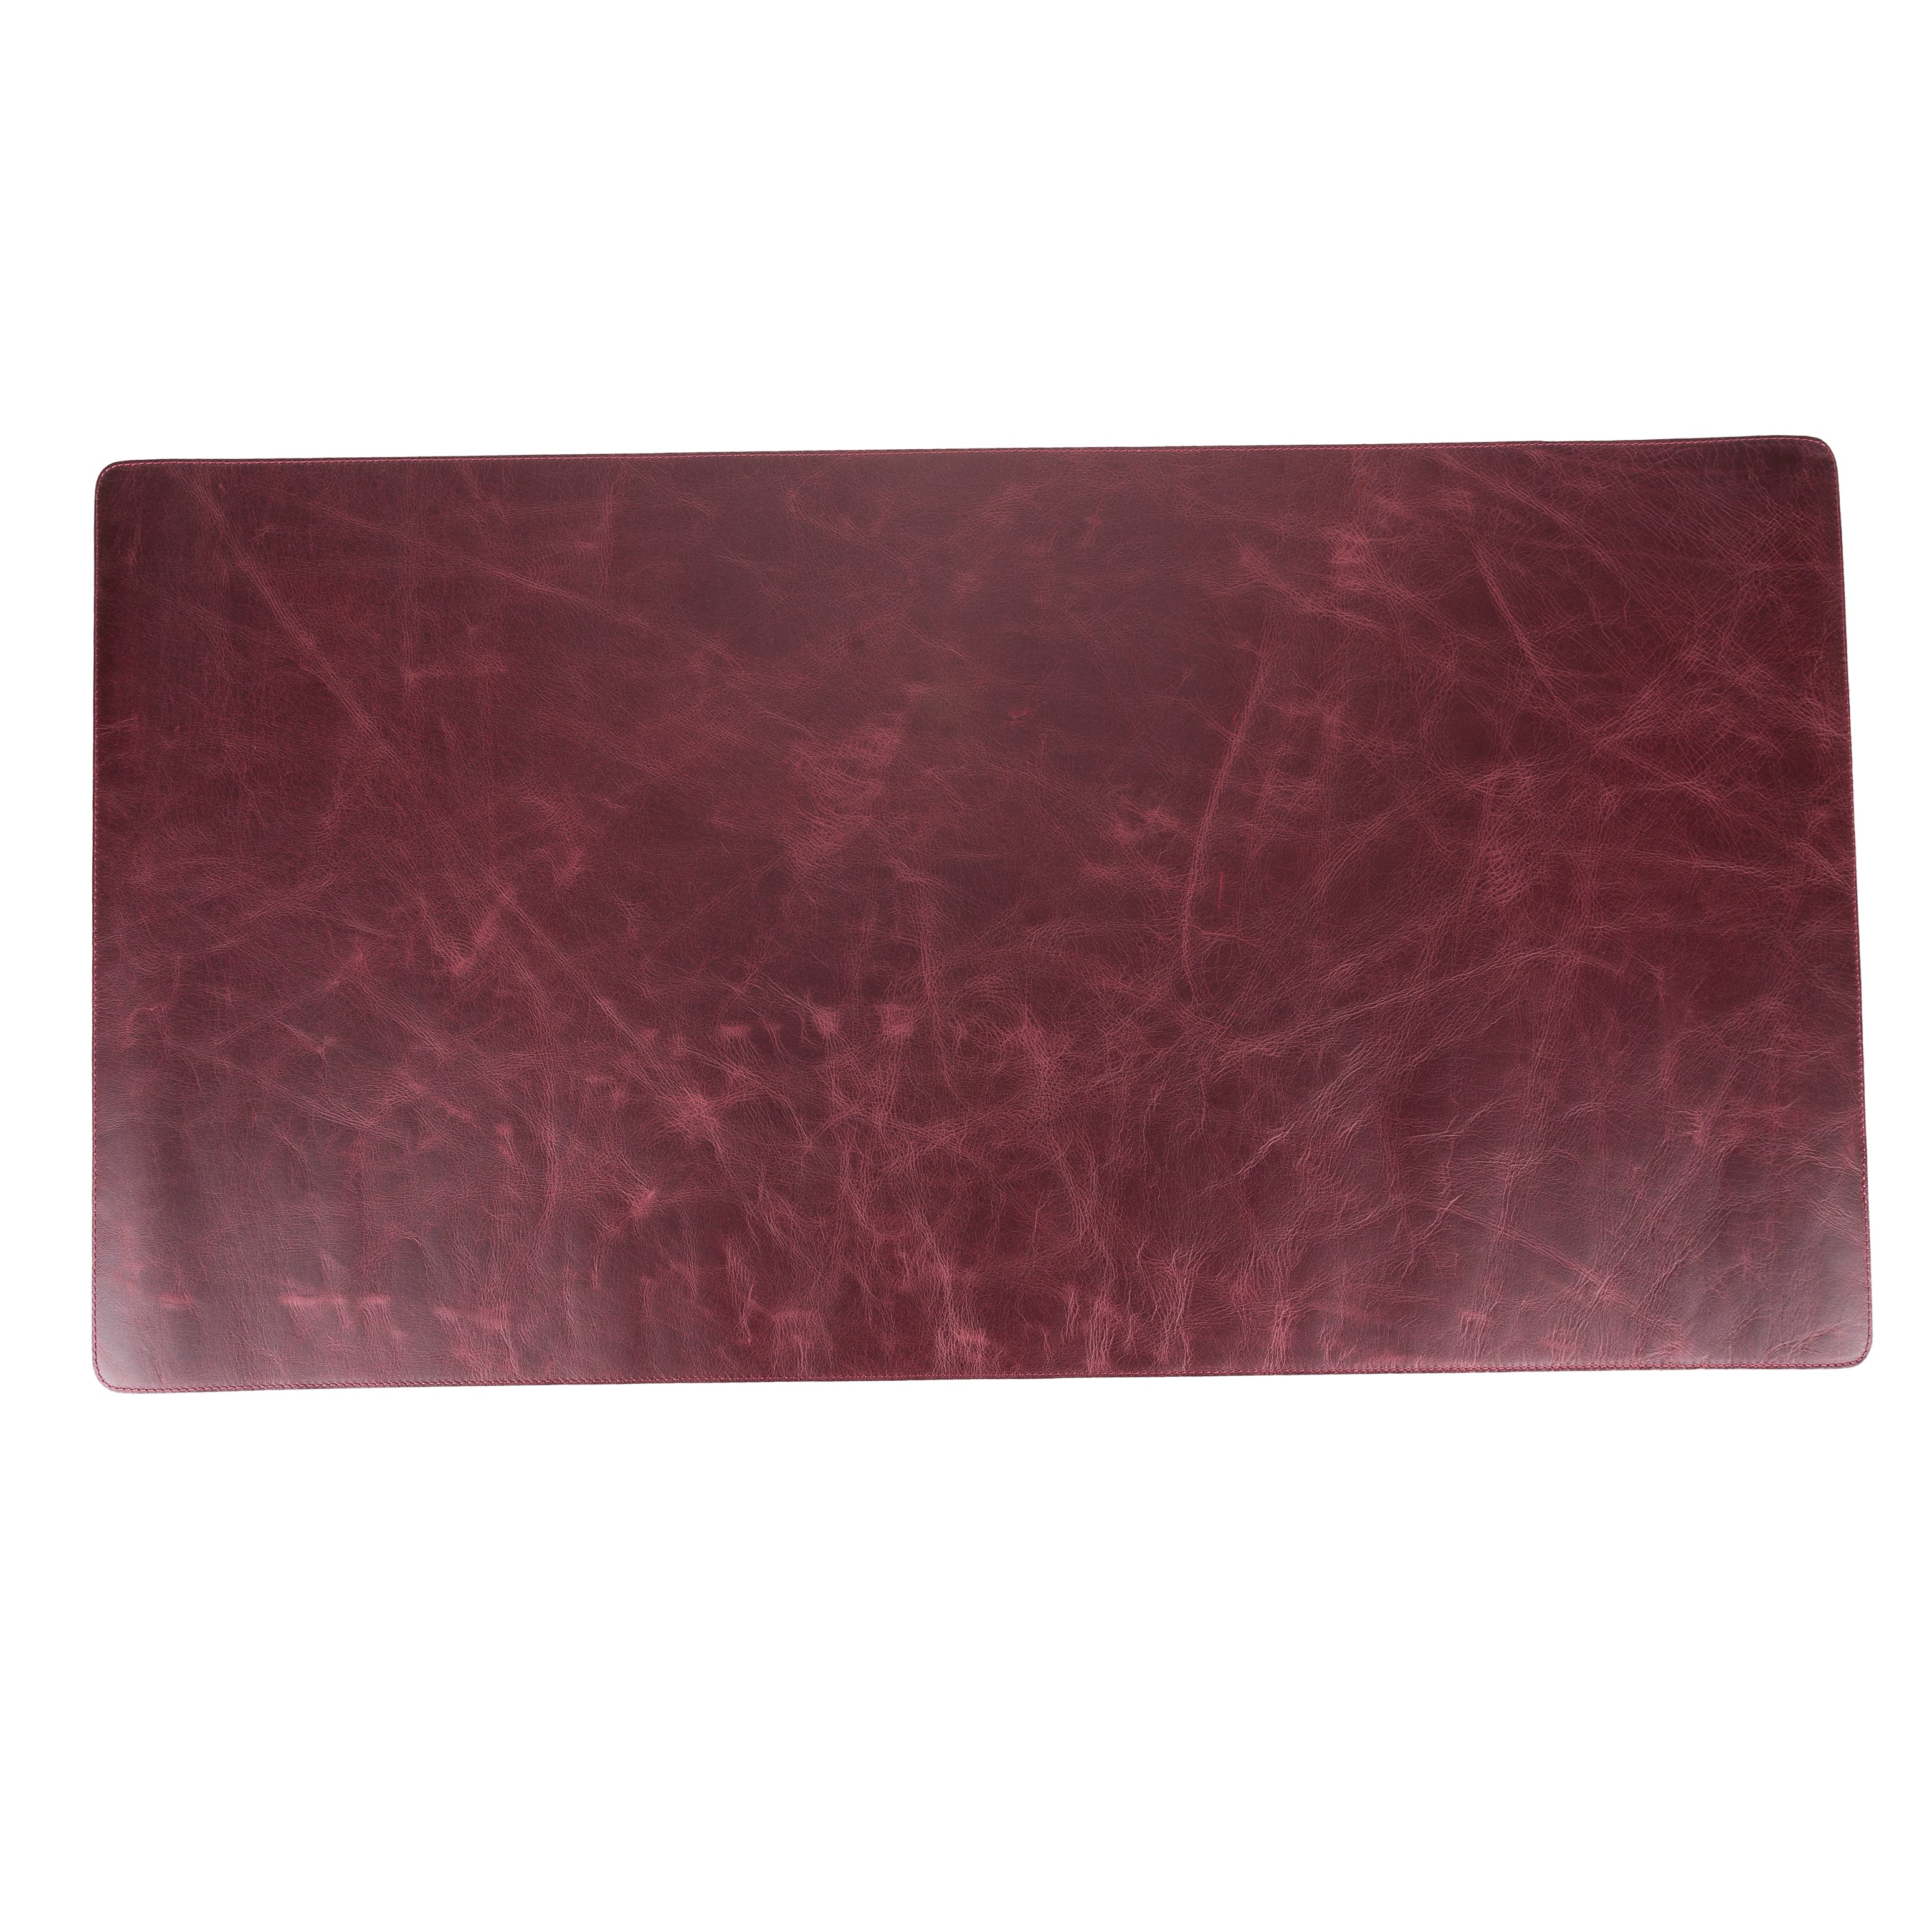 LupinnyLeather Genuine Cherry Leather Deskmat, Computer Pad, Office Desk Pad 4